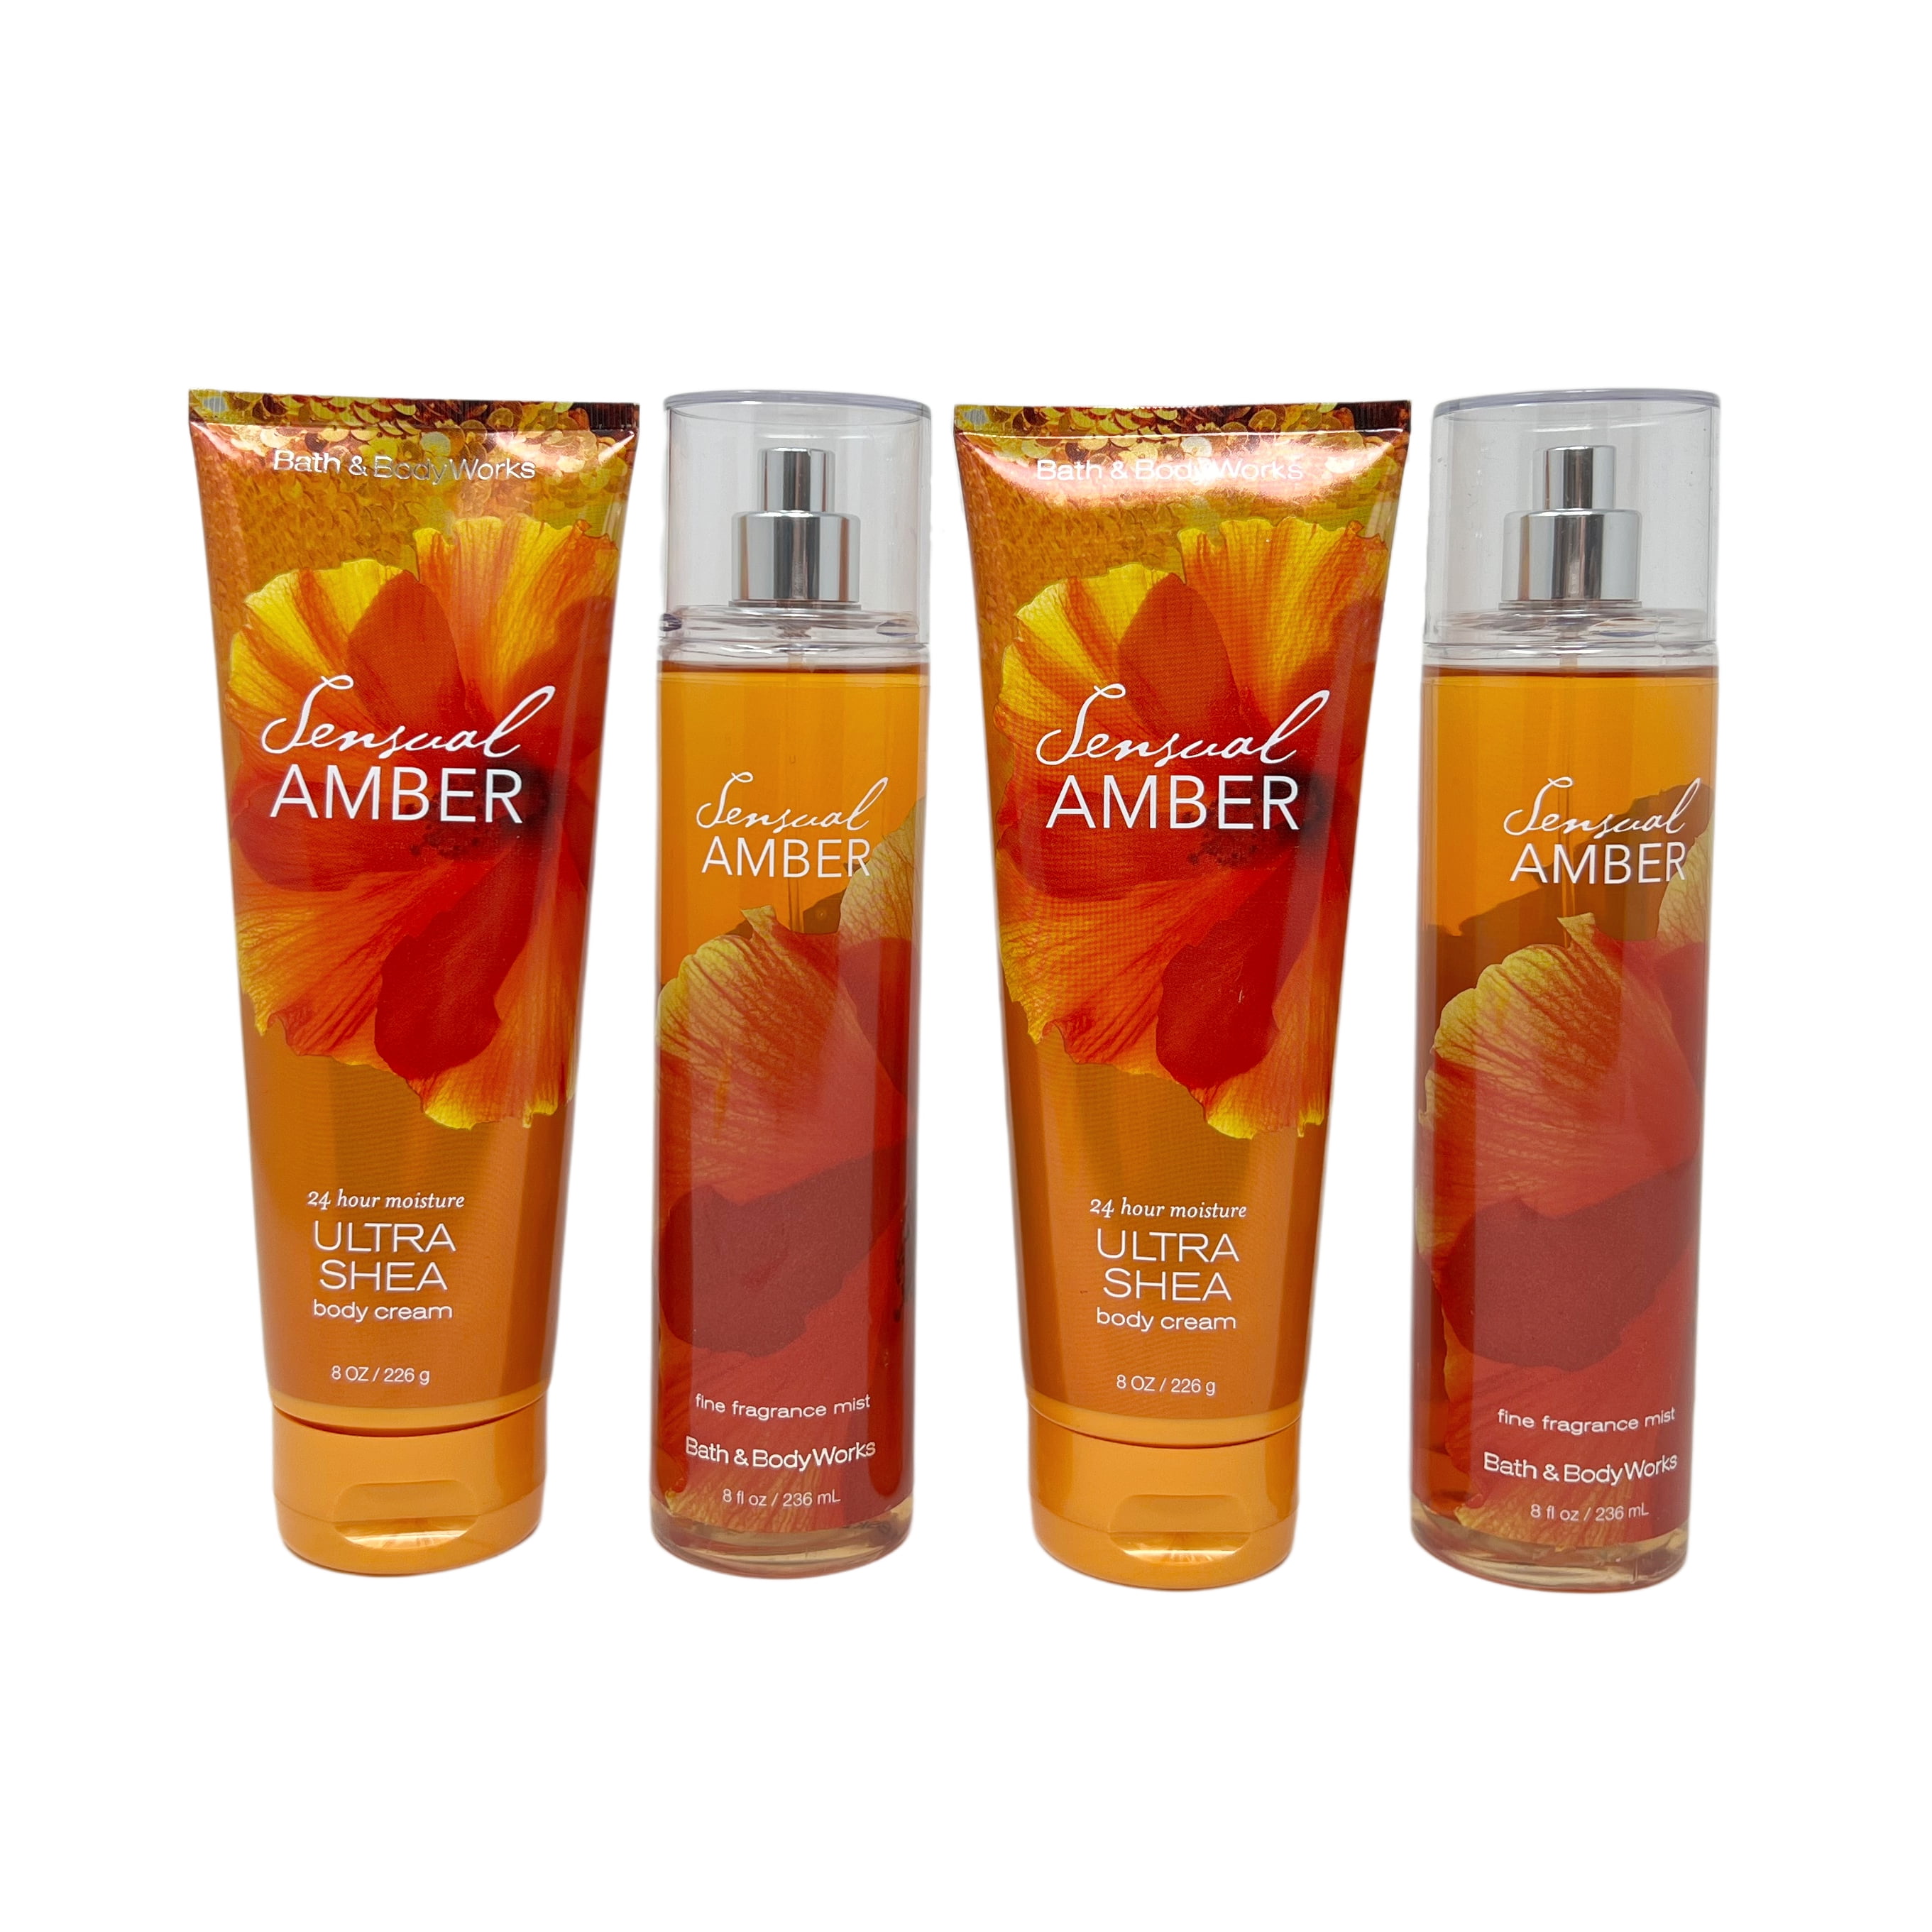 Bath & Body Works Signature Collection Sensual Amber Gift Set 2 Body Cream  & 2 Fragrance Mist. Lot of 4